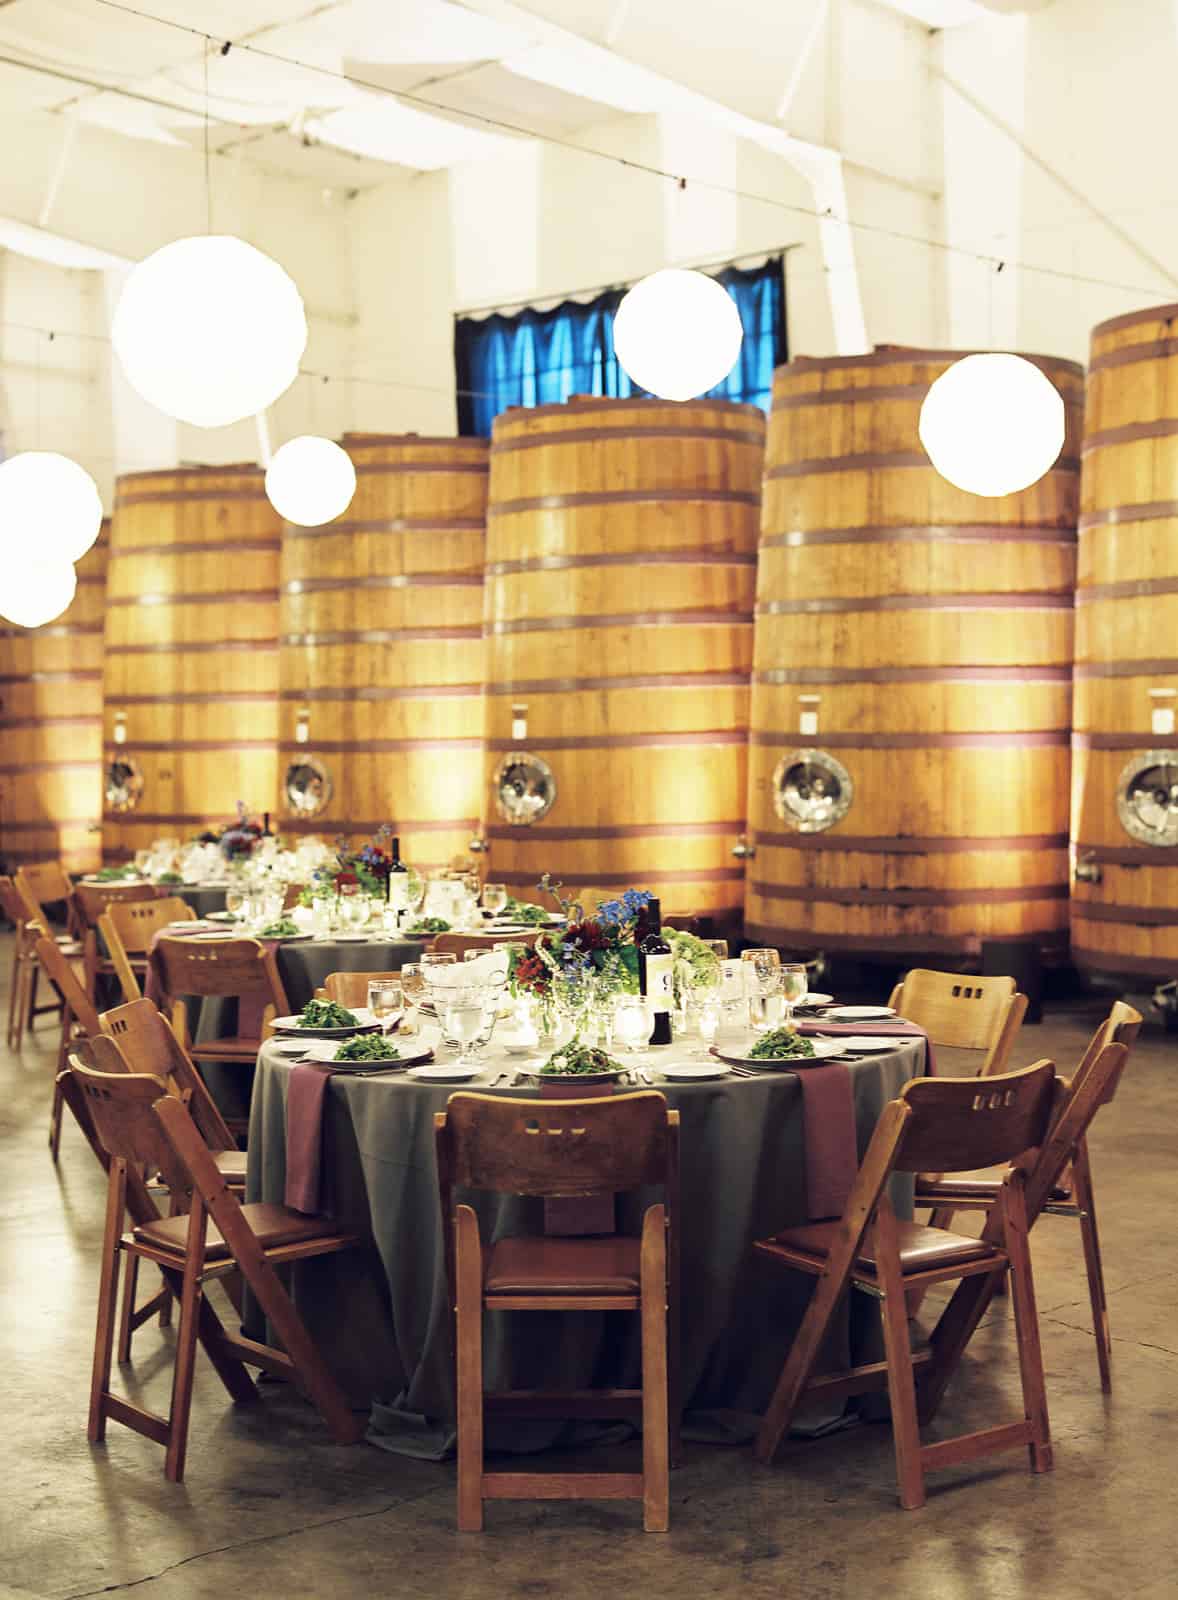 Table setttings in front of wine vats